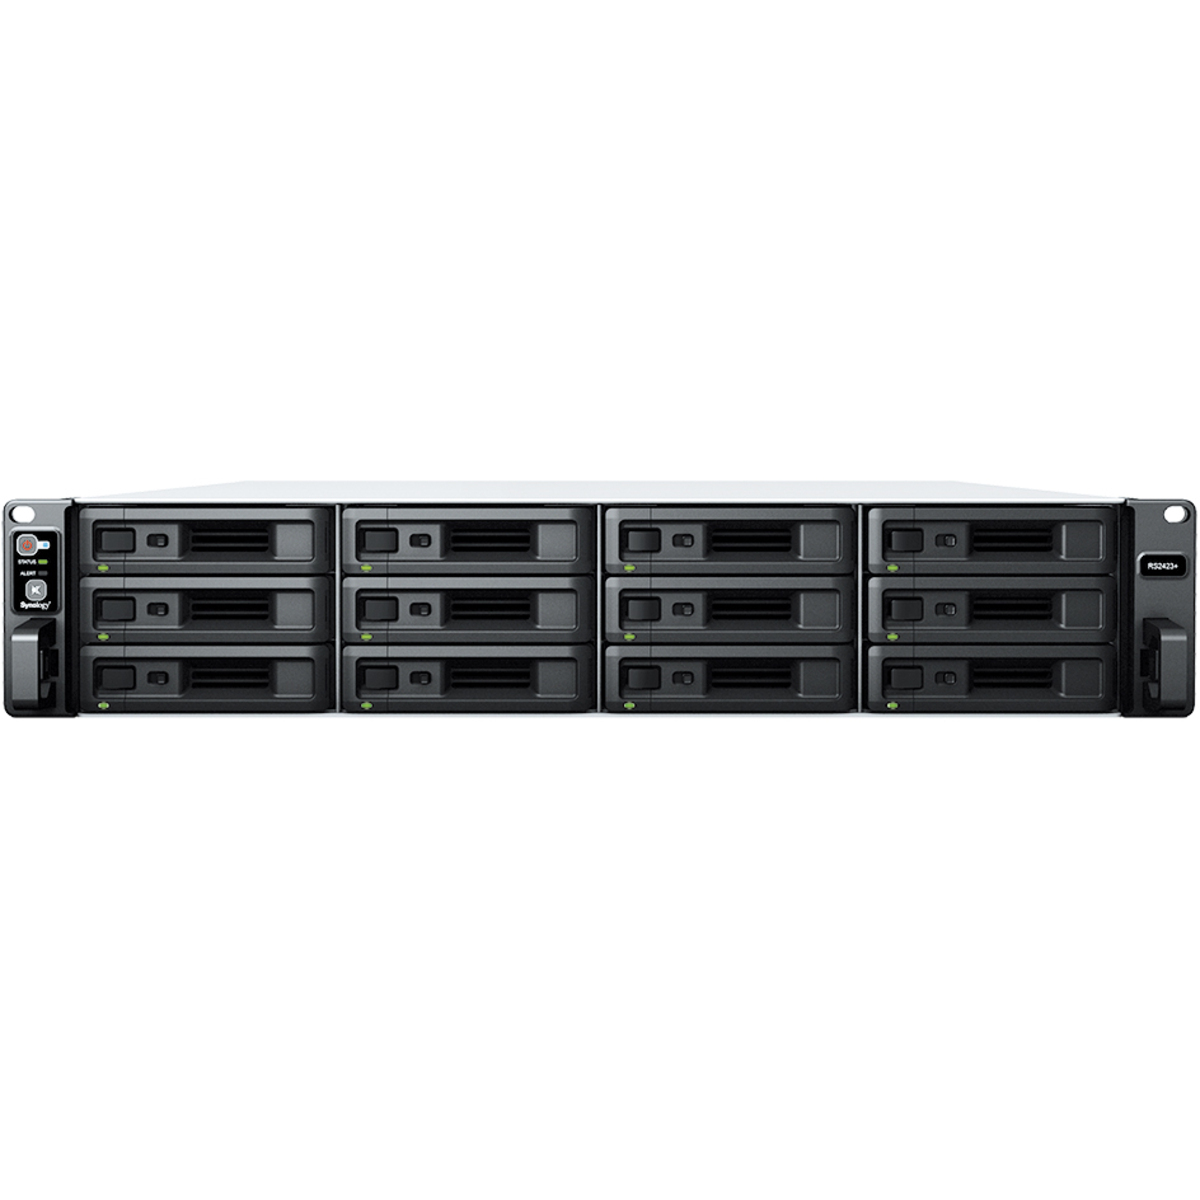 Synology RackStation RS2423RP+ 40tb 12-Bay RackMount Multimedia / Power User / Business NAS - Network Attached Storage Device 10x4tb Seagate IronWolf Pro ST4000NT001 3.5 7200rpm SATA 6Gb/s HDD NAS Class Drives Installed - Burn-In Tested - FREE RAM UPGRADE RackStation RS2423RP+